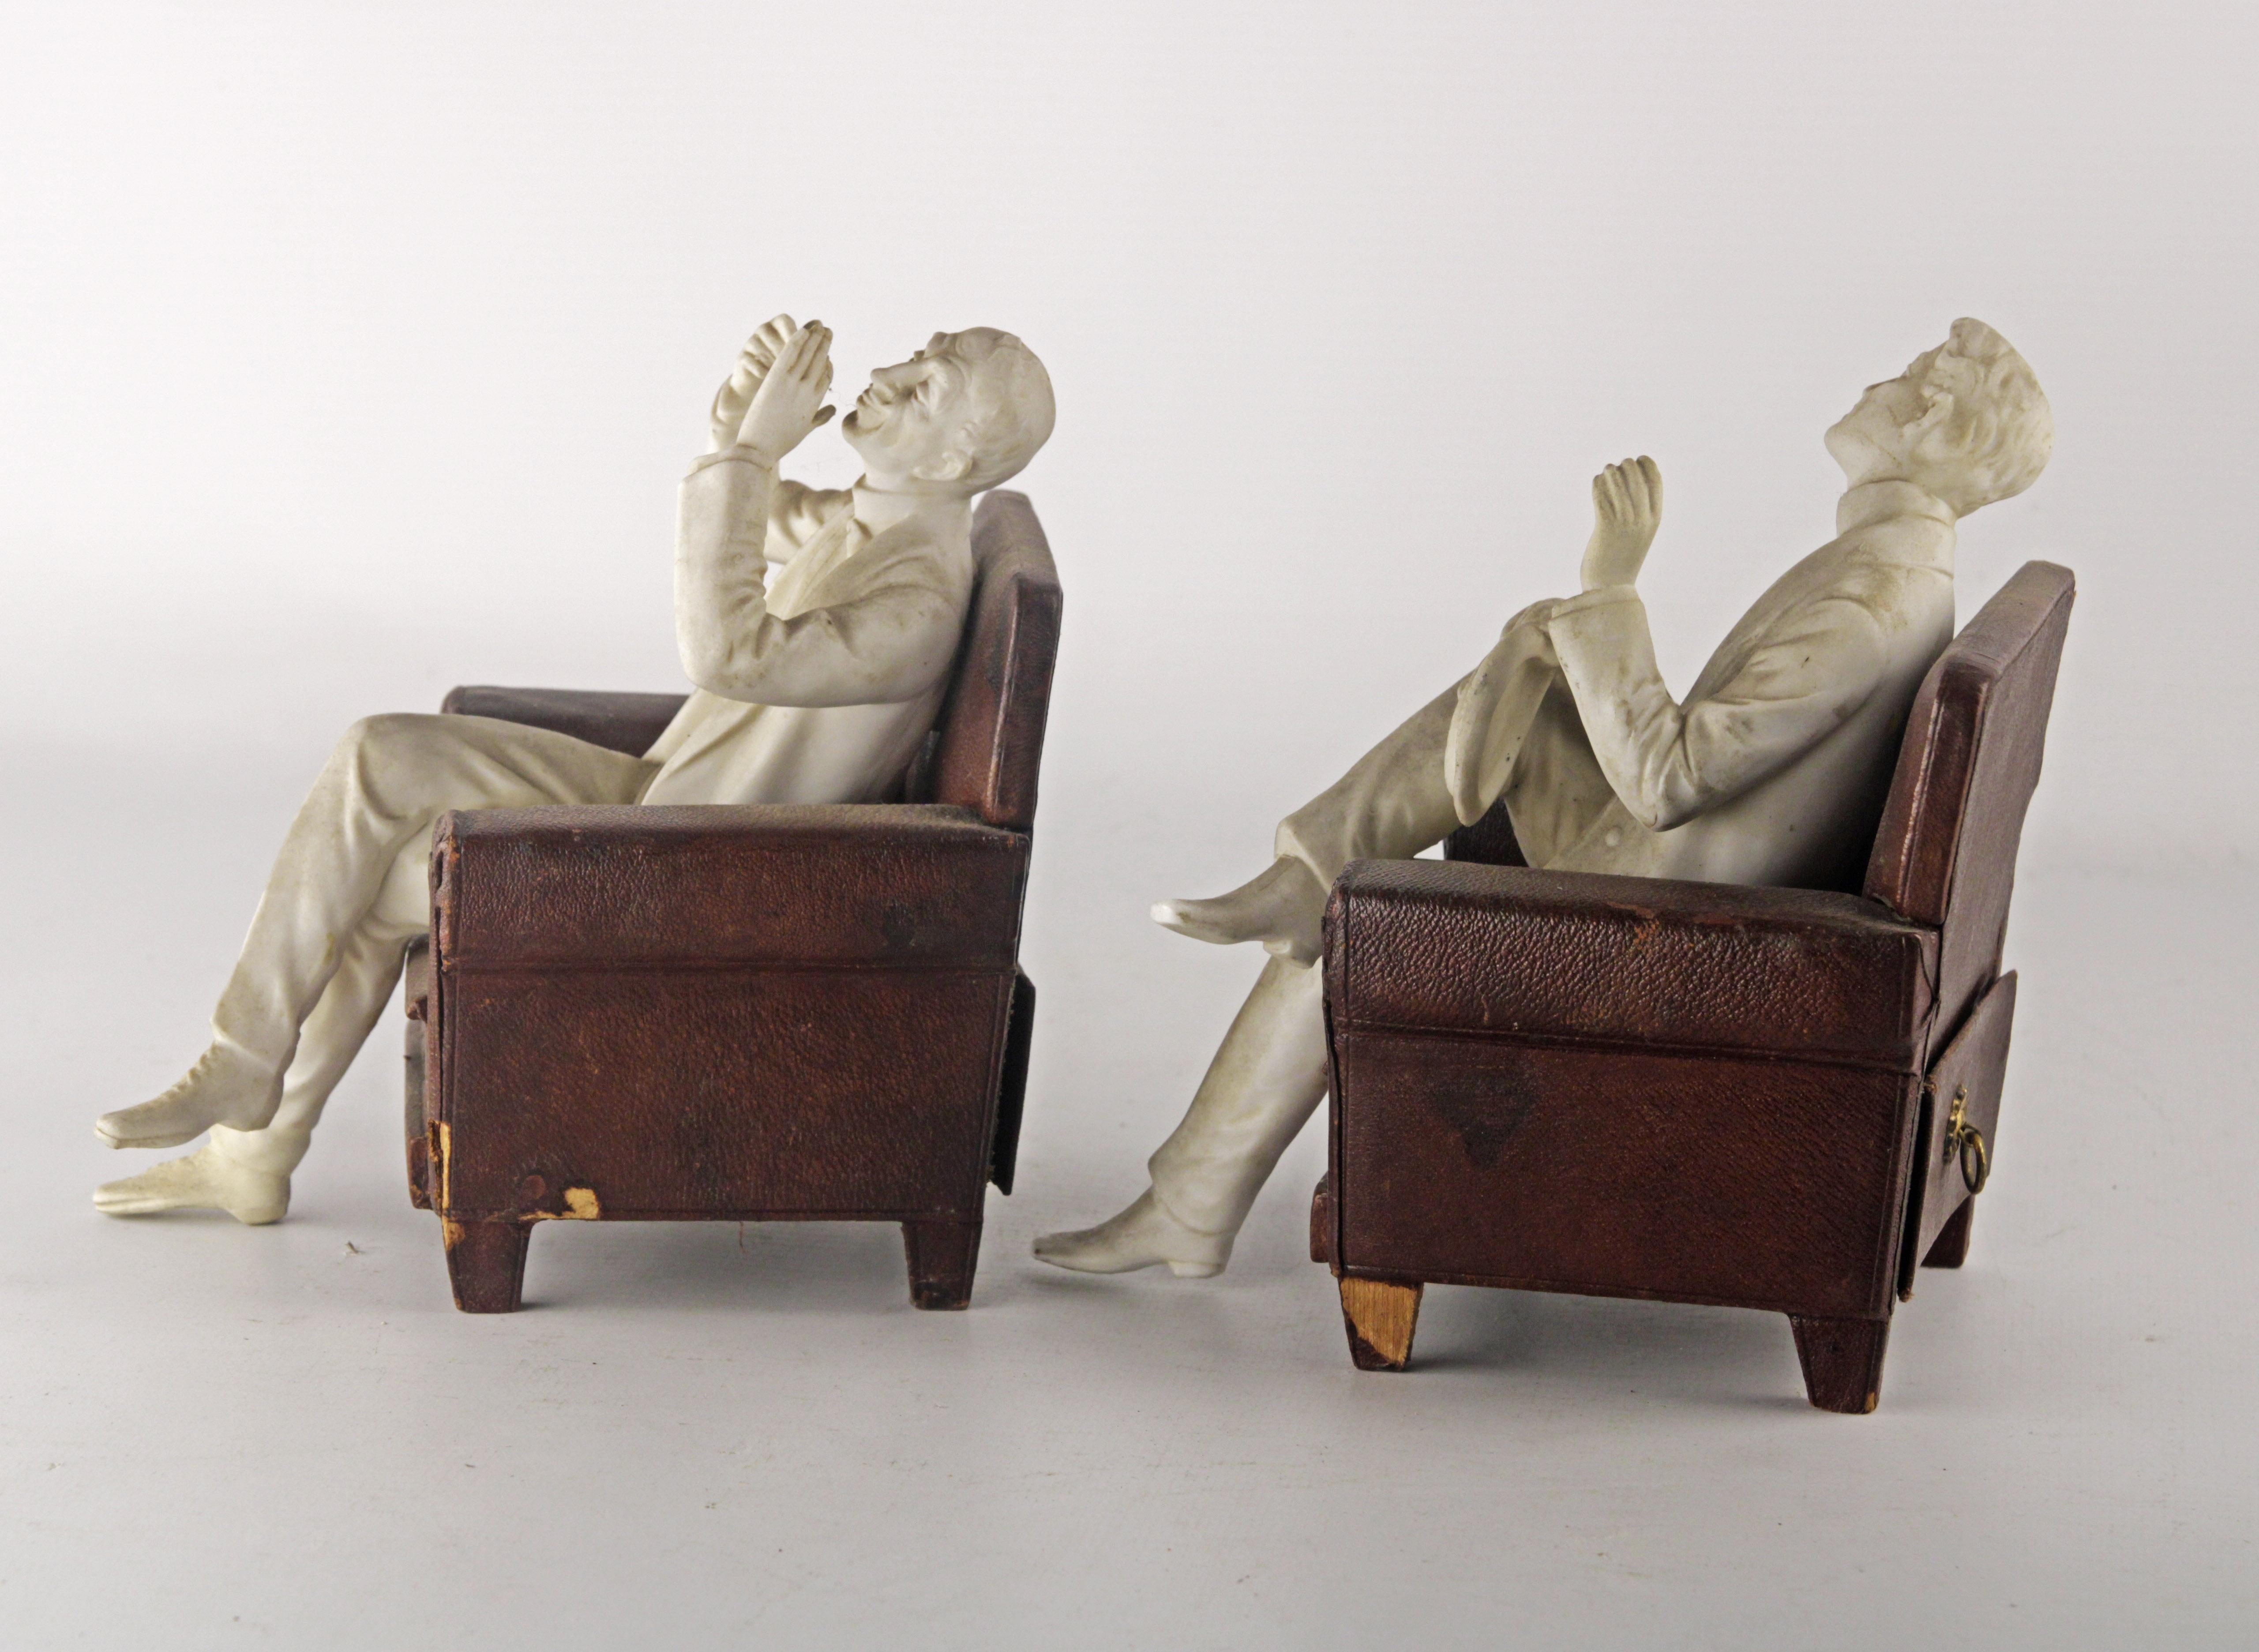 French Pair of 20th Century Decorative Biscuit Porcelain Sculptures with Jewelry Boxes For Sale